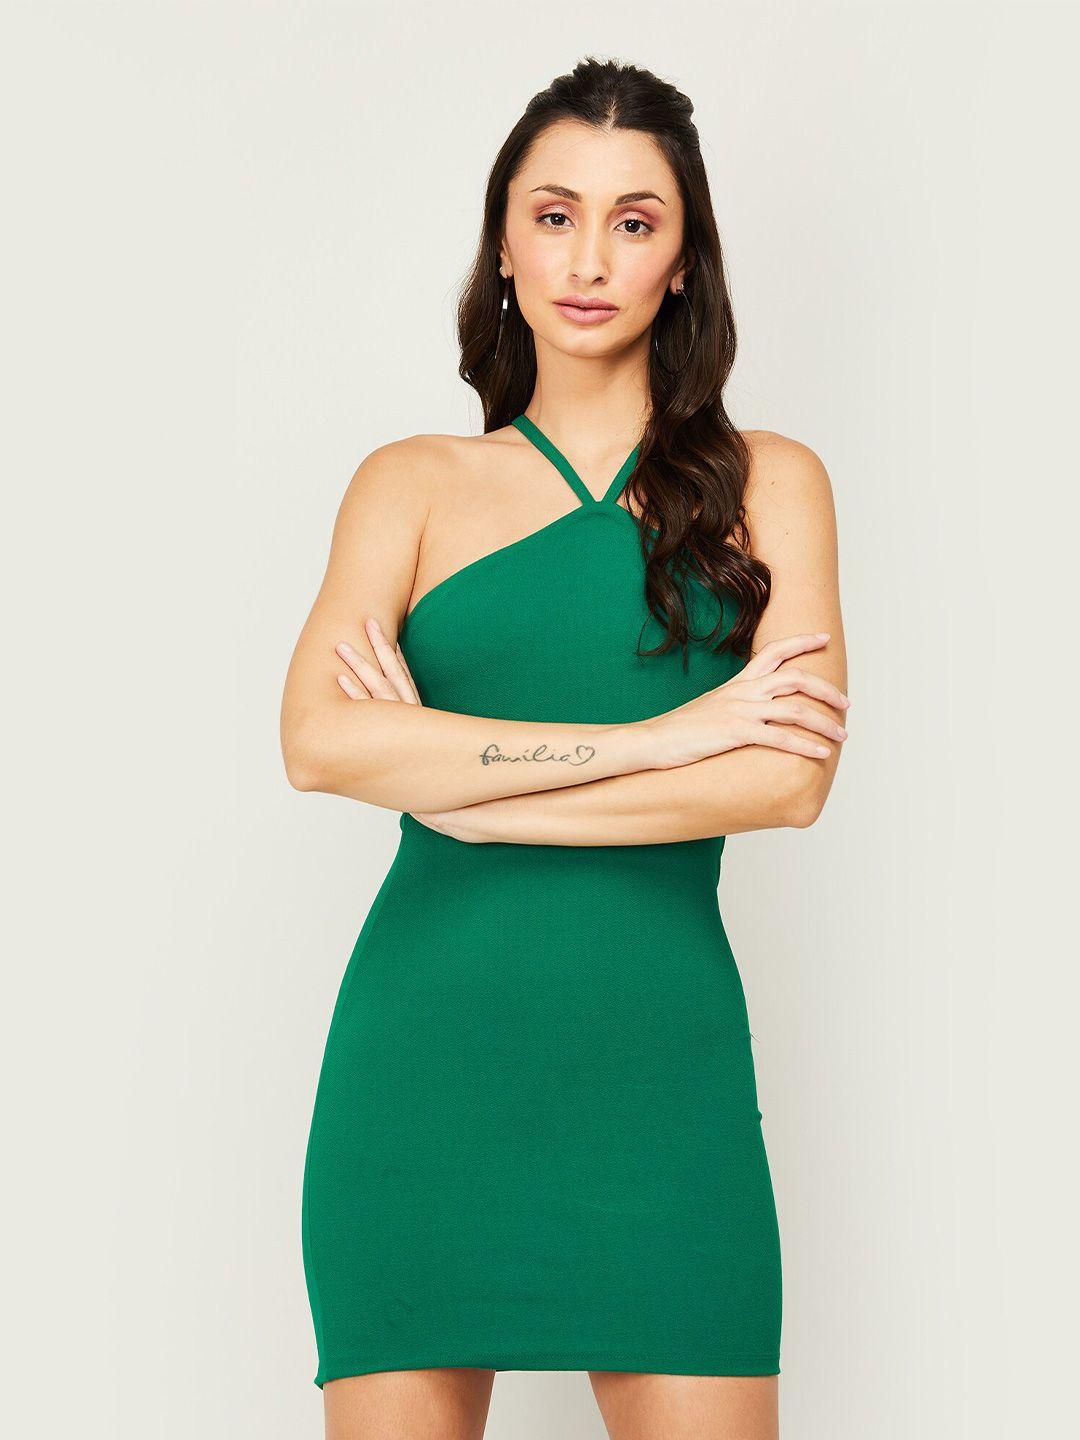 ginger by lifestyle shoulder strap bodycon mini dress